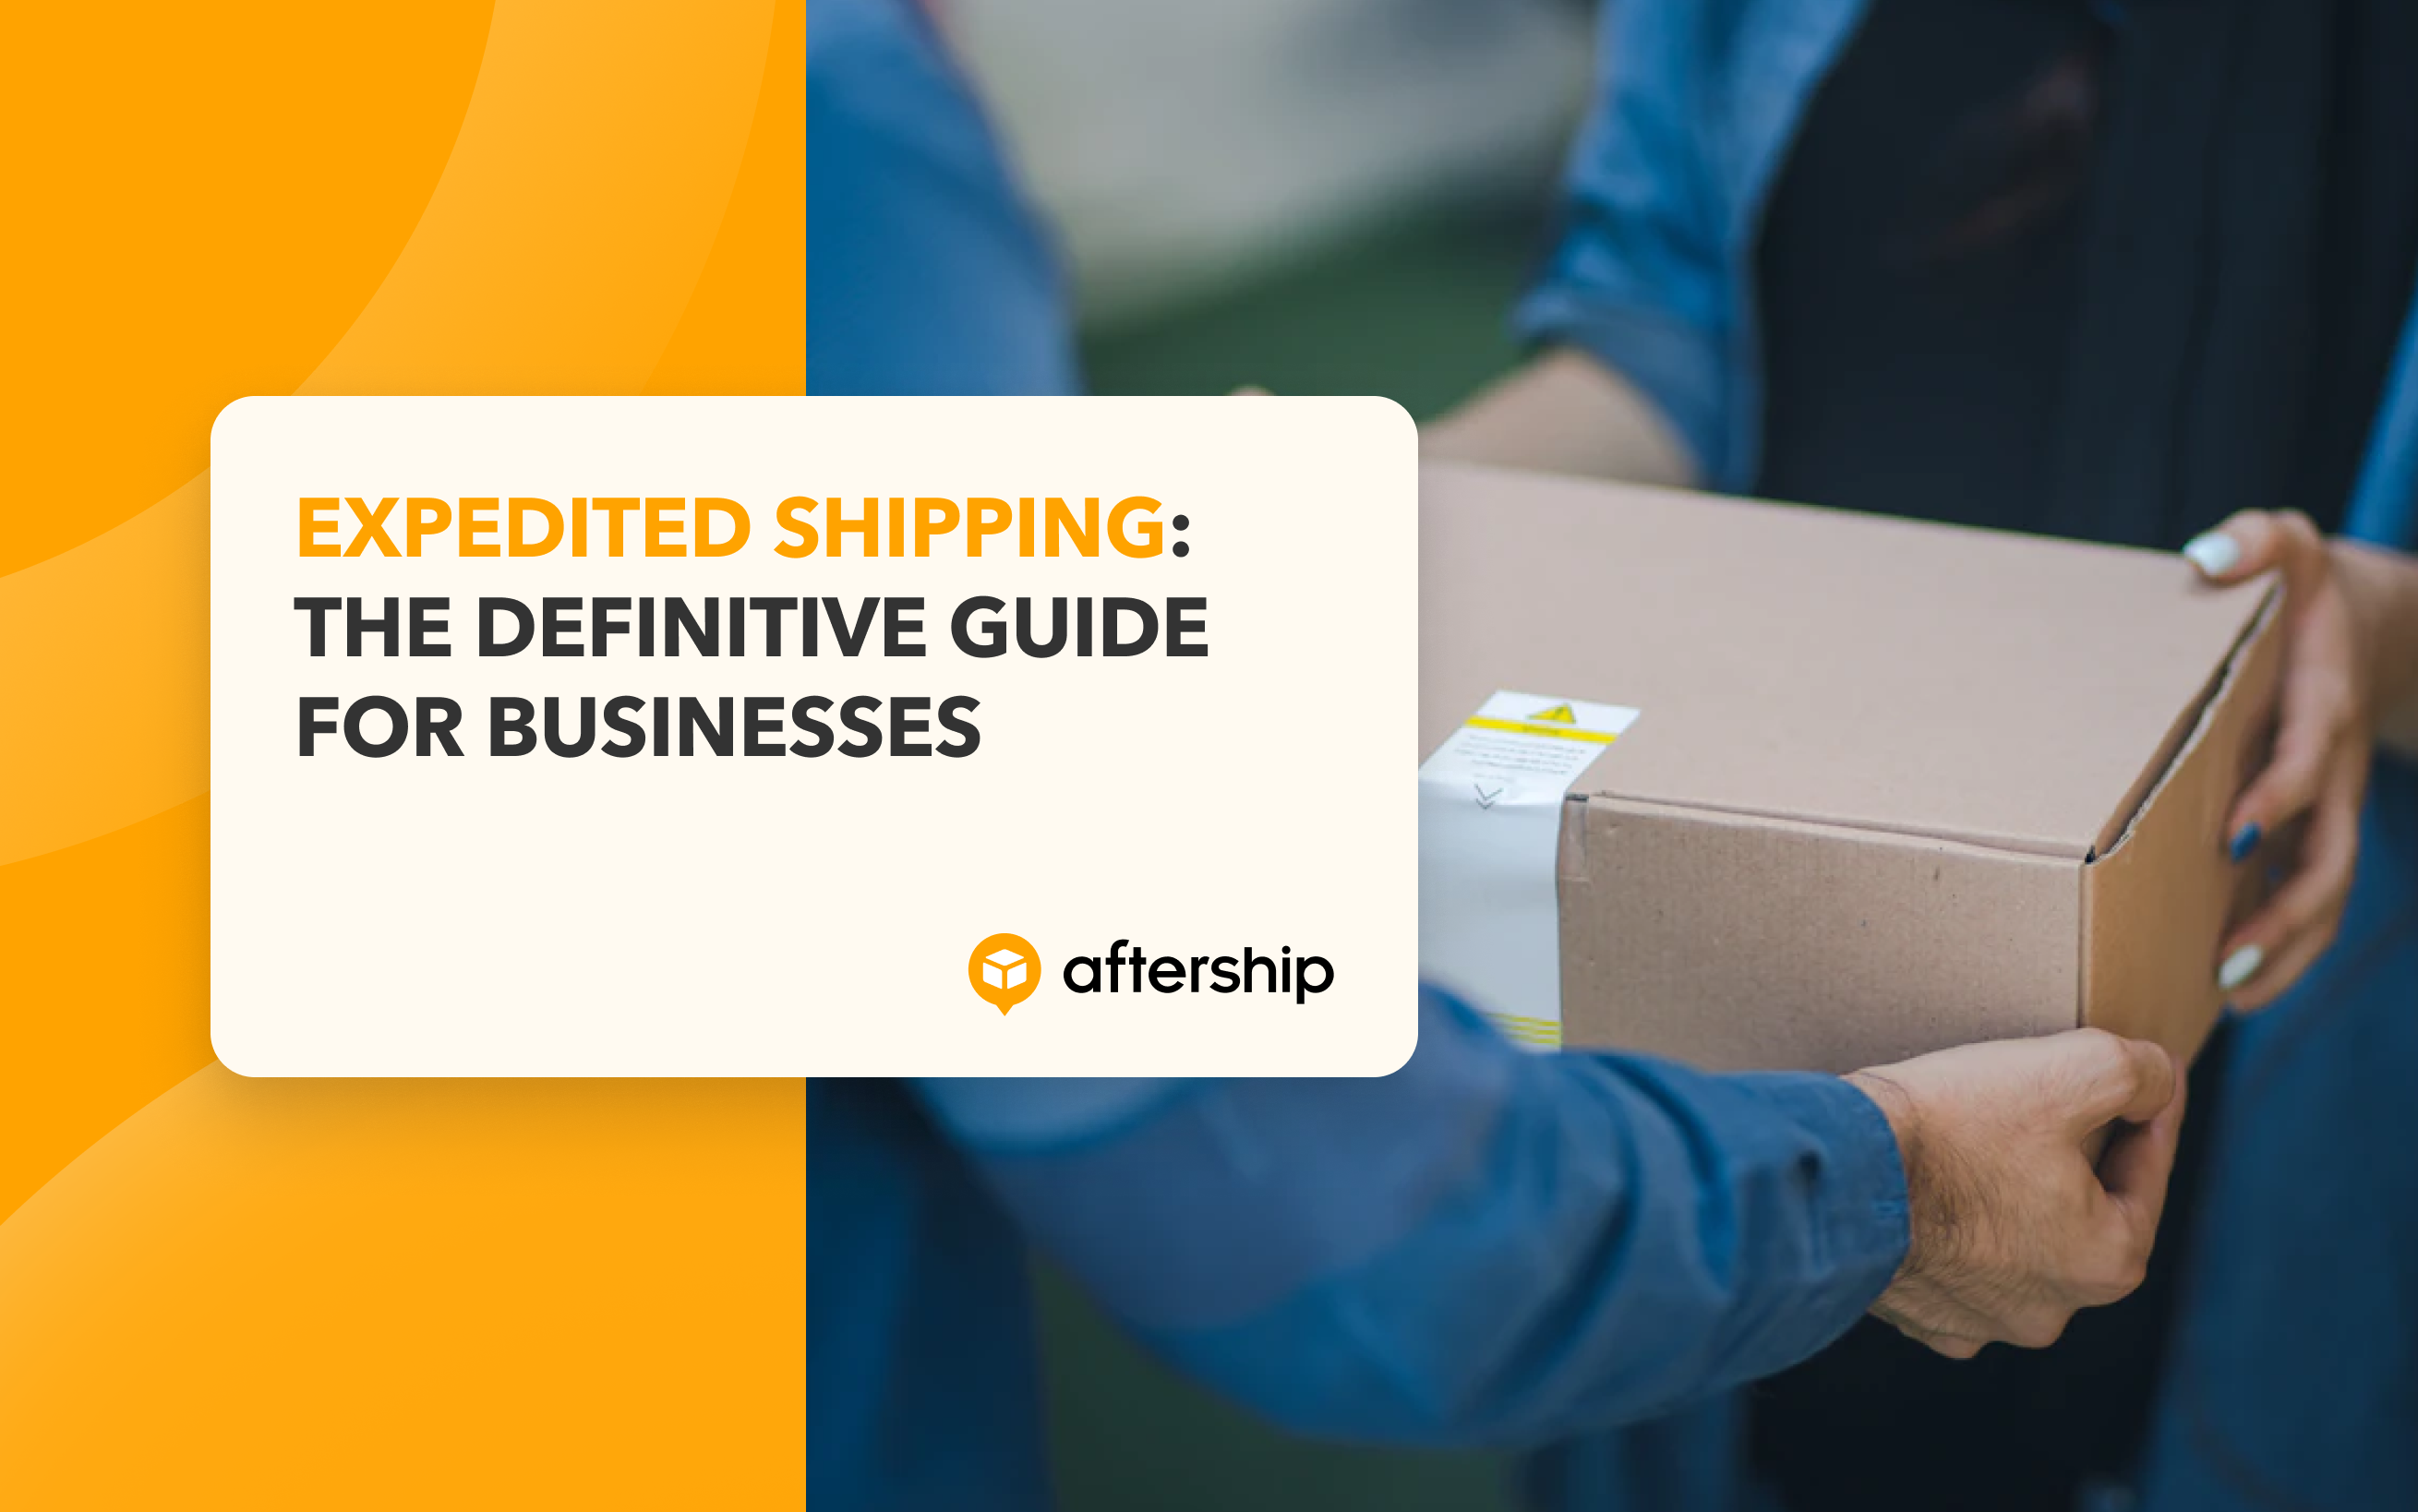 Expedited shipping: The definitive guide for businesses